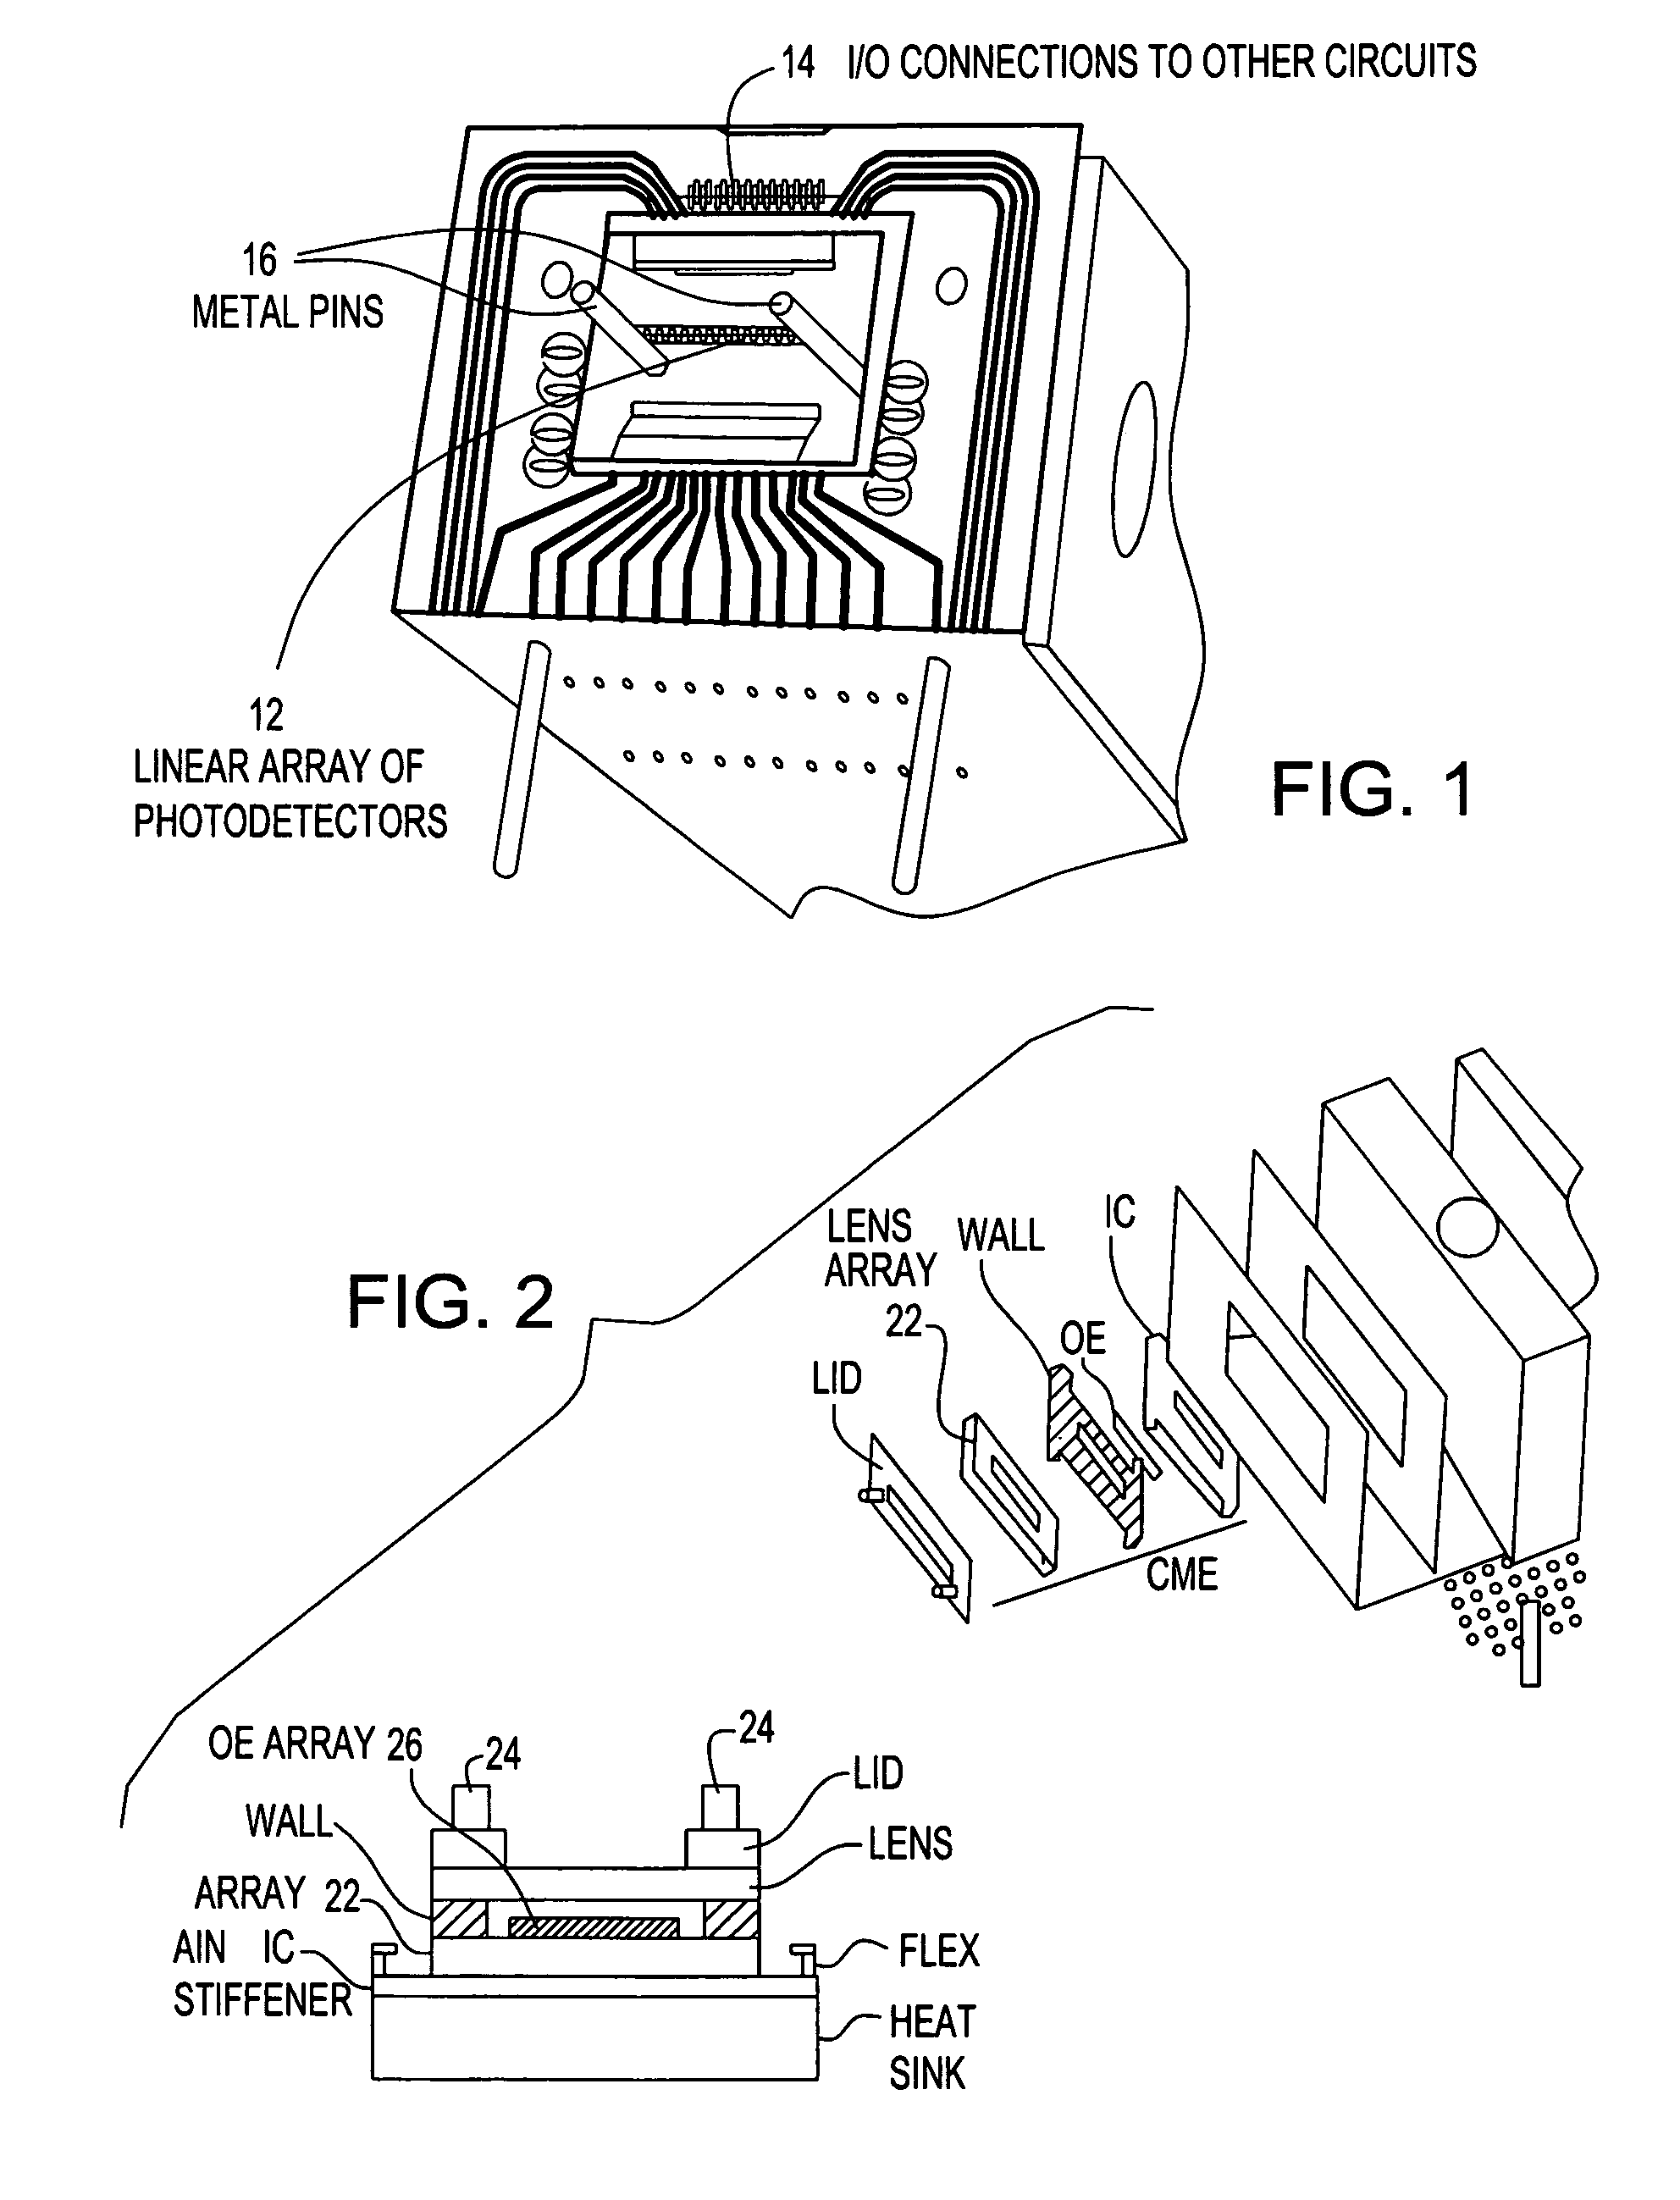 Hybrid optical/electronic structures fabricated by a common molding process